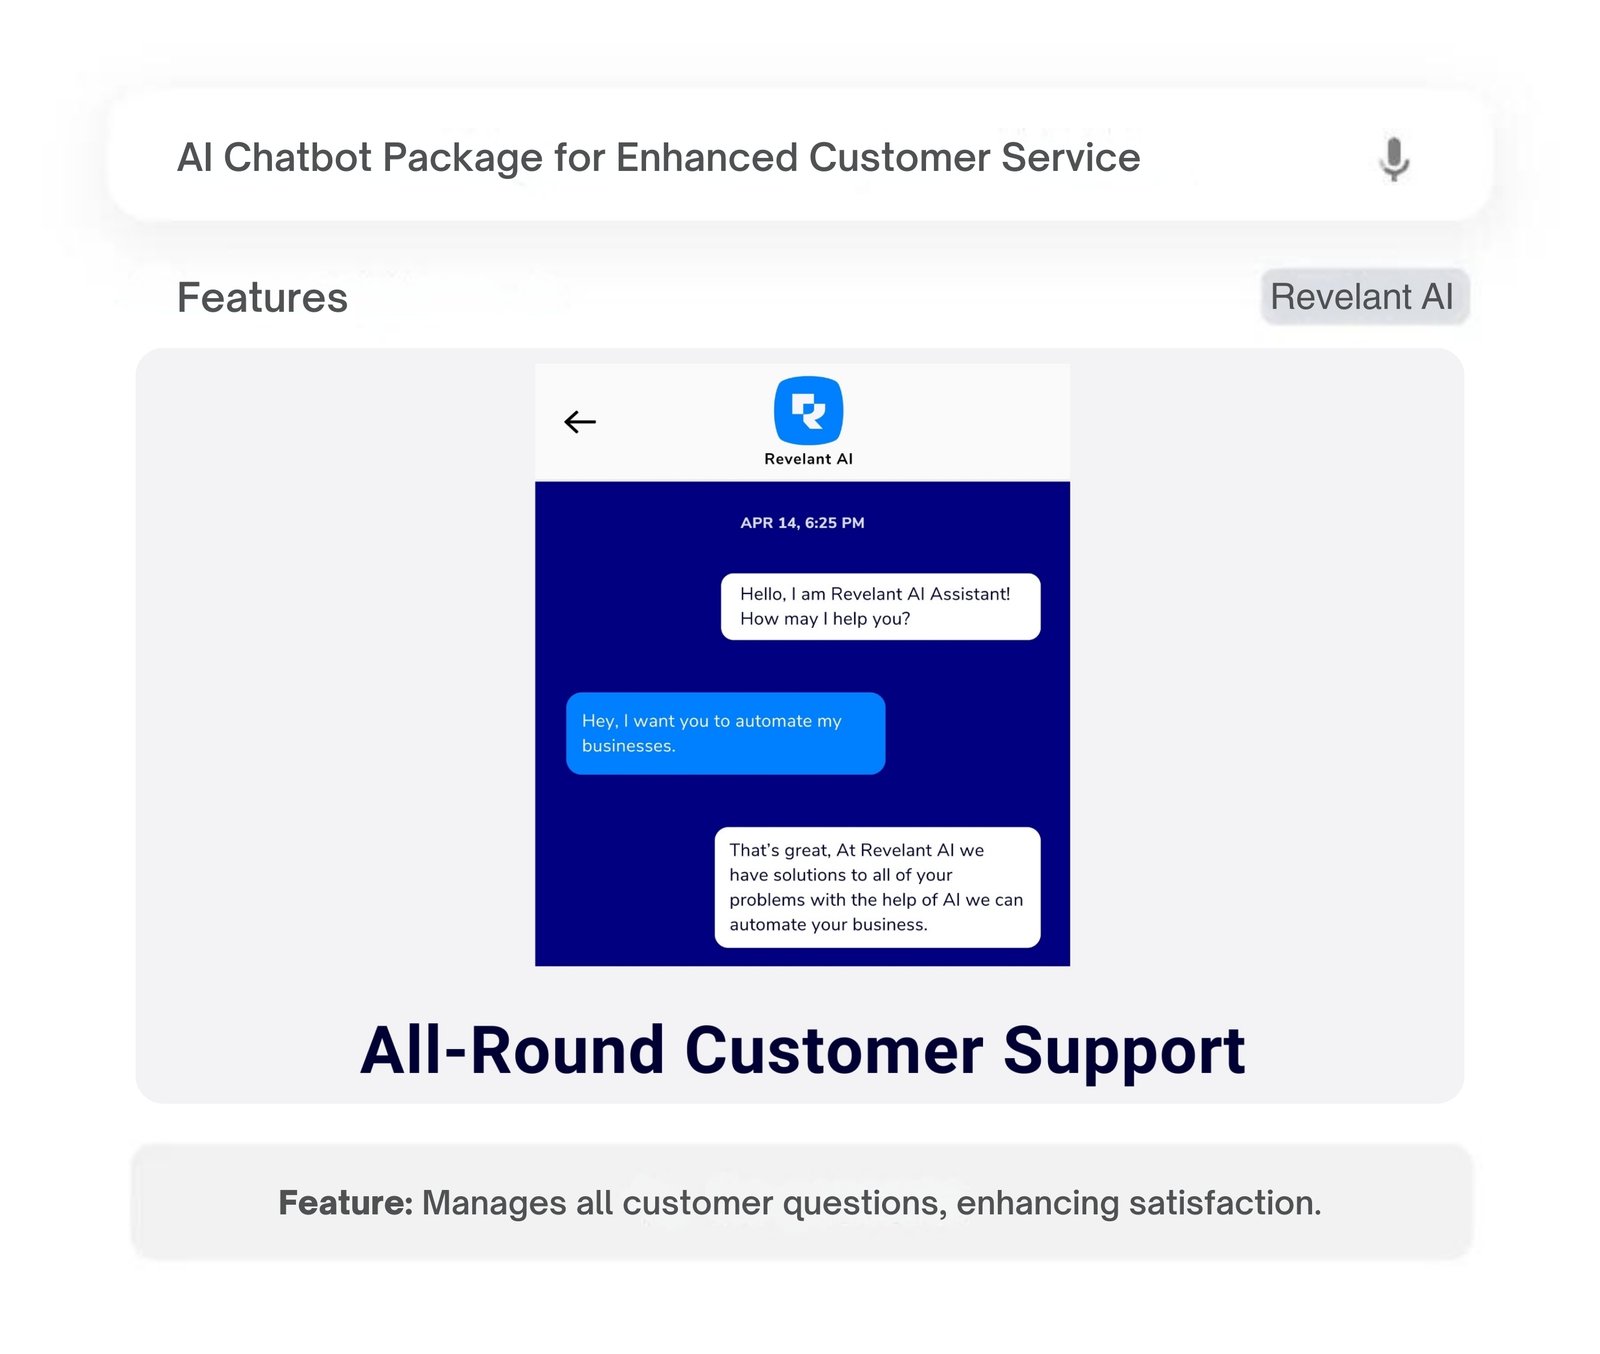 AI chatbot interface providing all-round customer support by managing a wide range of queries.